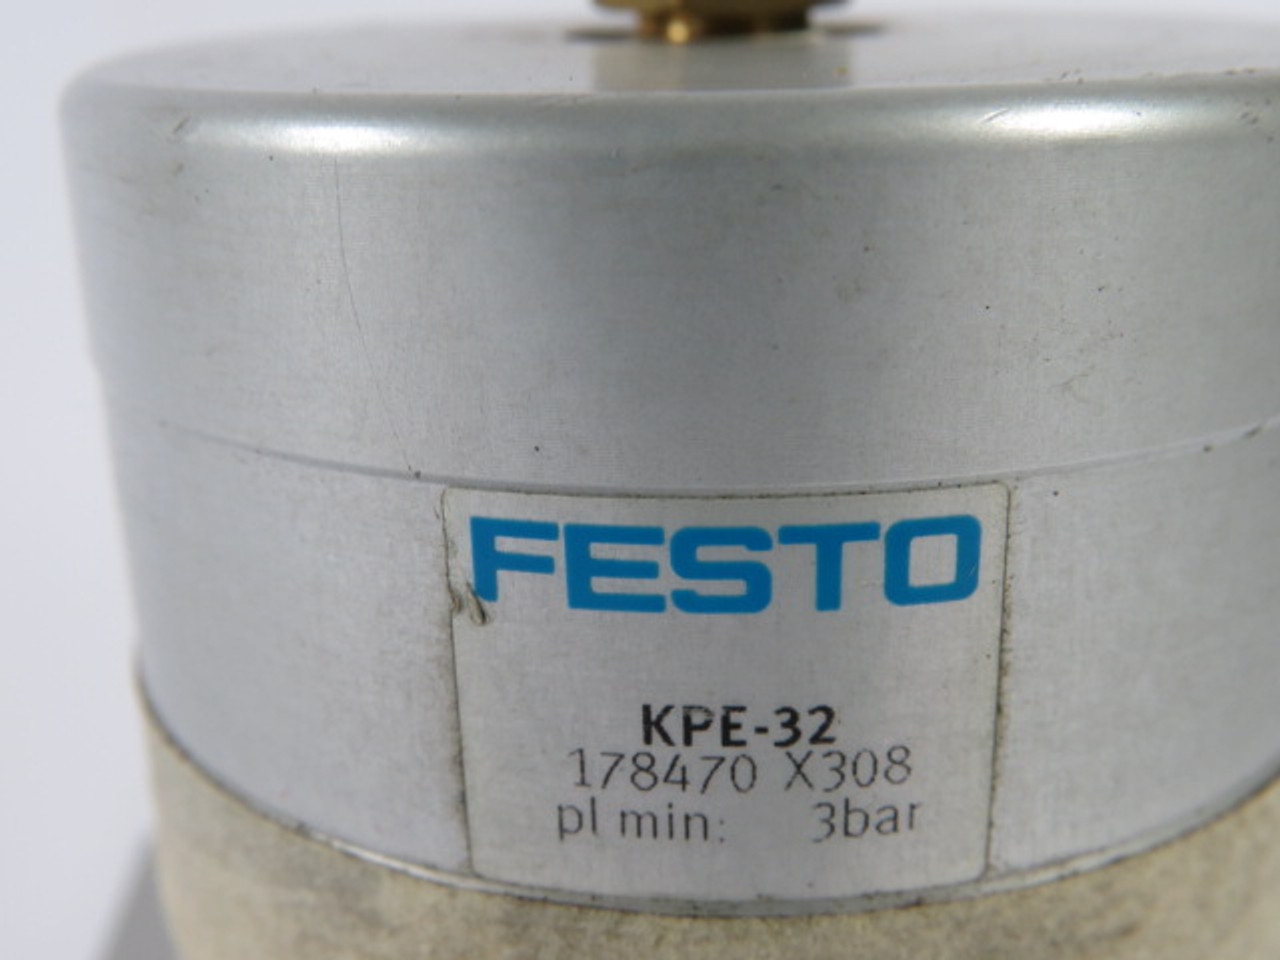 Festo KPE-32 Clamping Unit 10bar 7500N Hold Force 178470 USED